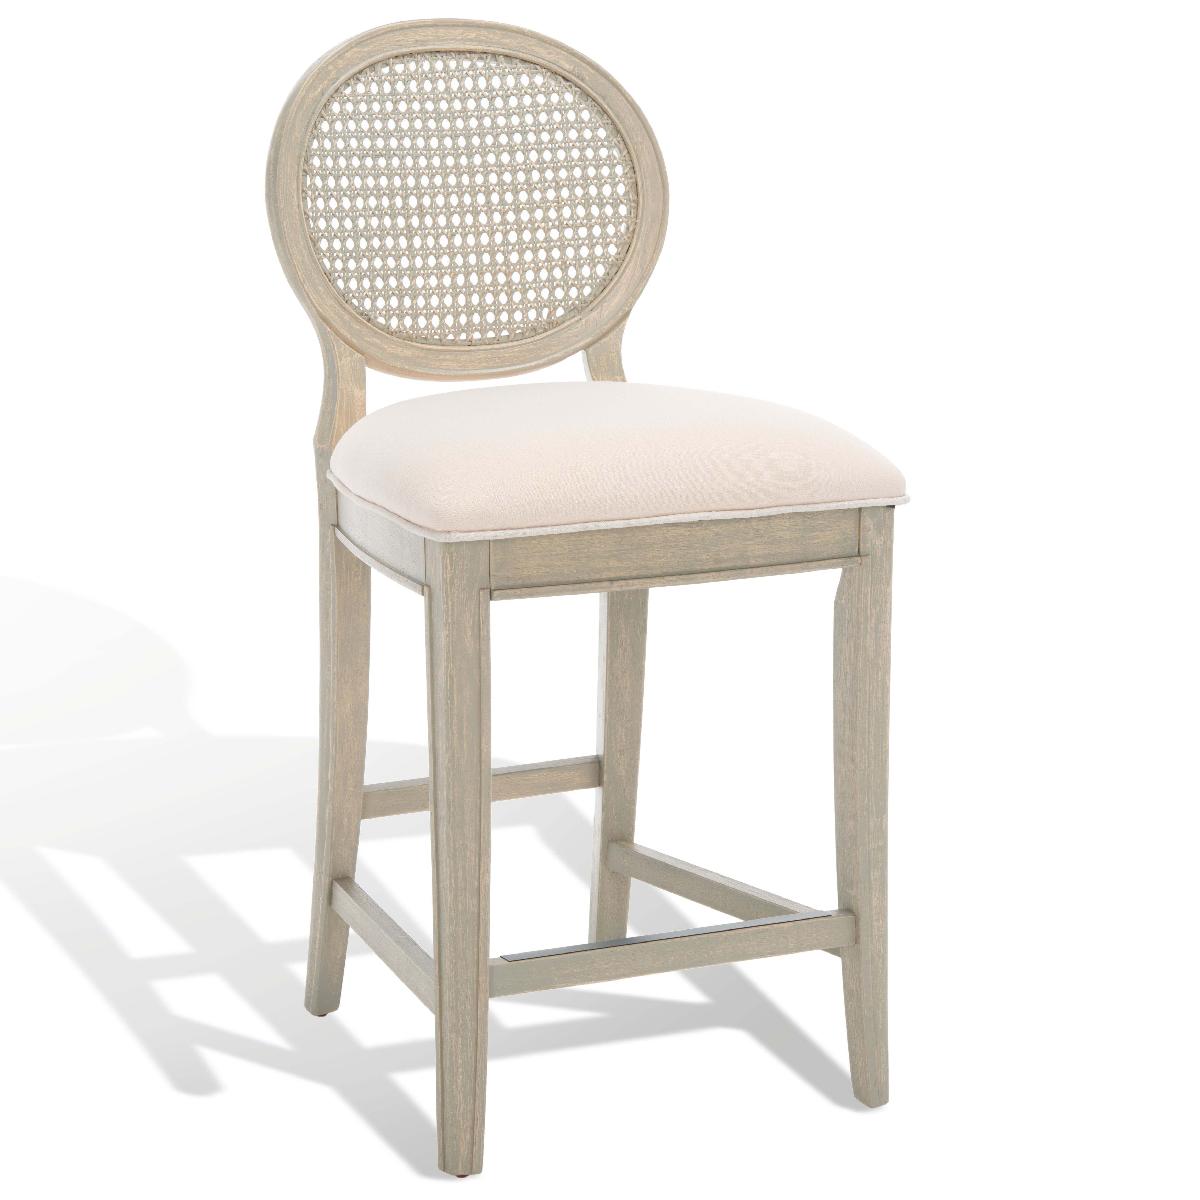 Safavieh Couture Karlee Rattan Back Counter Stool(Set of 2)